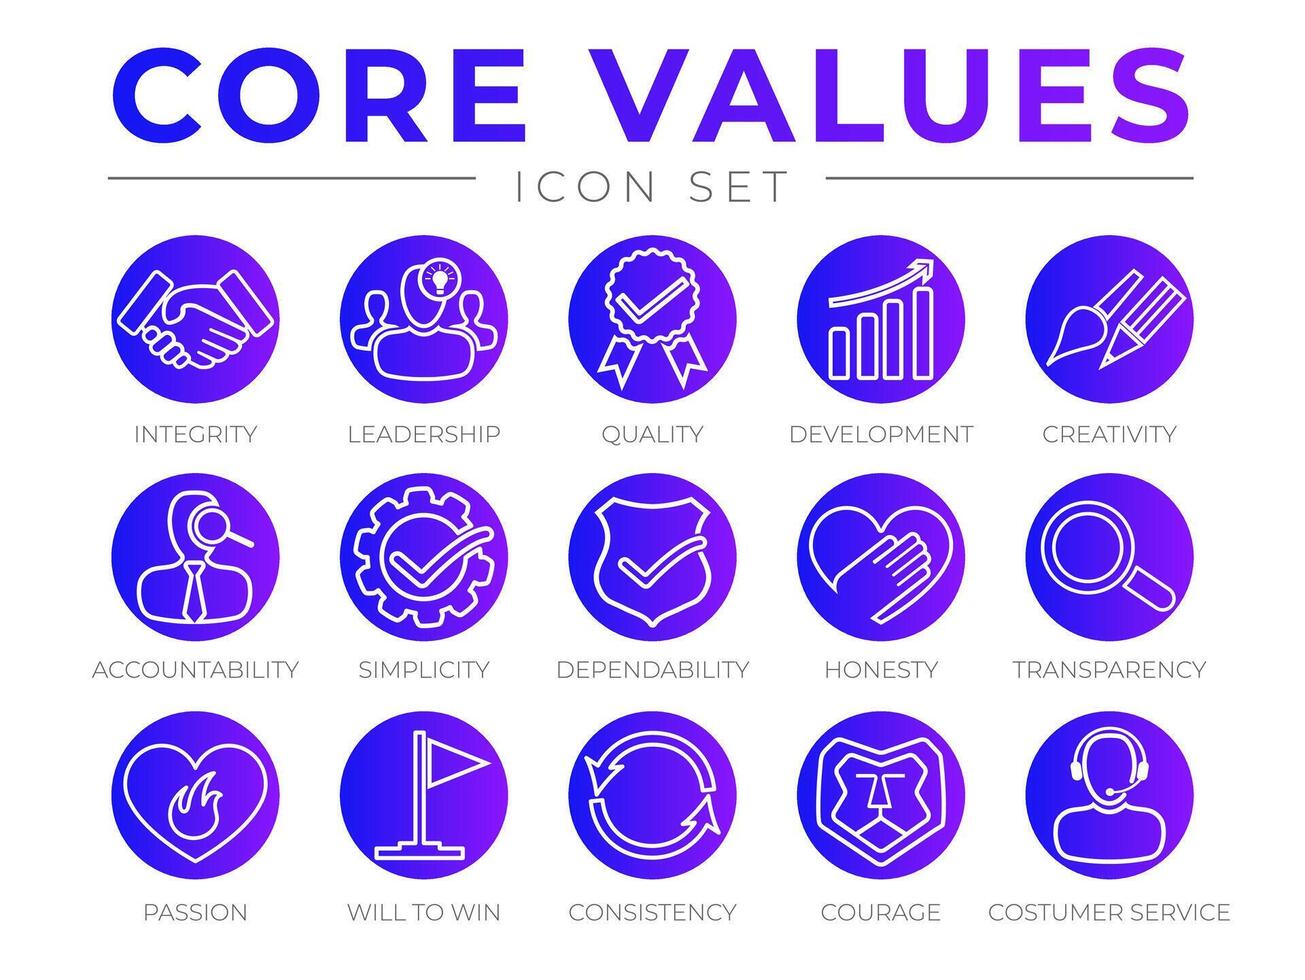 Company Core Values Round Outline Web Icon Set. Integrity, Leadership, Quality and Development, Dependability, Transparency, Passion, Will to win, Consistency, Courage and Customer Service Icons. vector